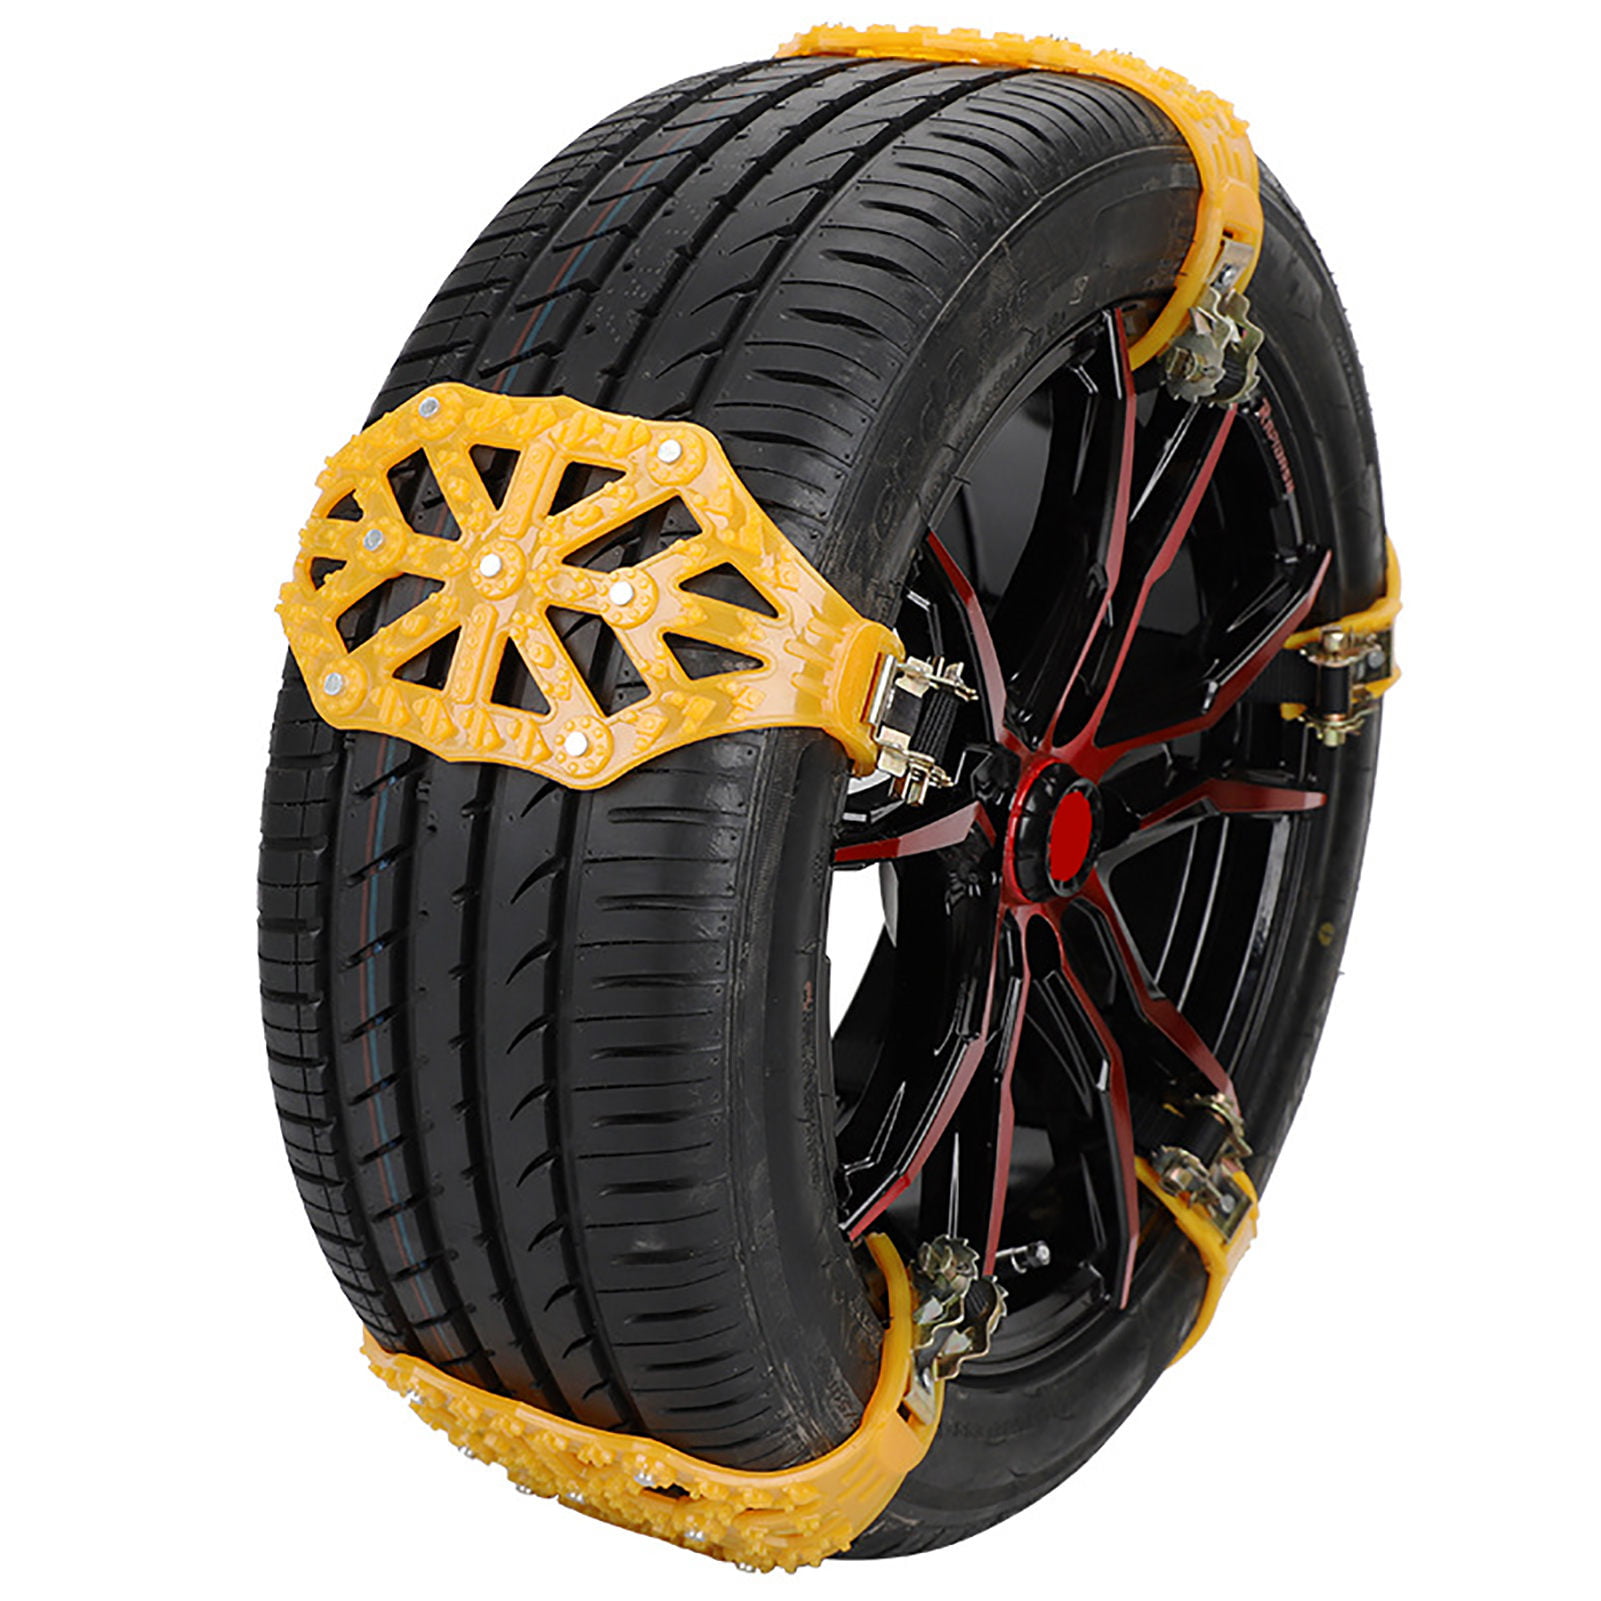 Tire Chain Alternatives to Get Your Car Unstuck from Snow